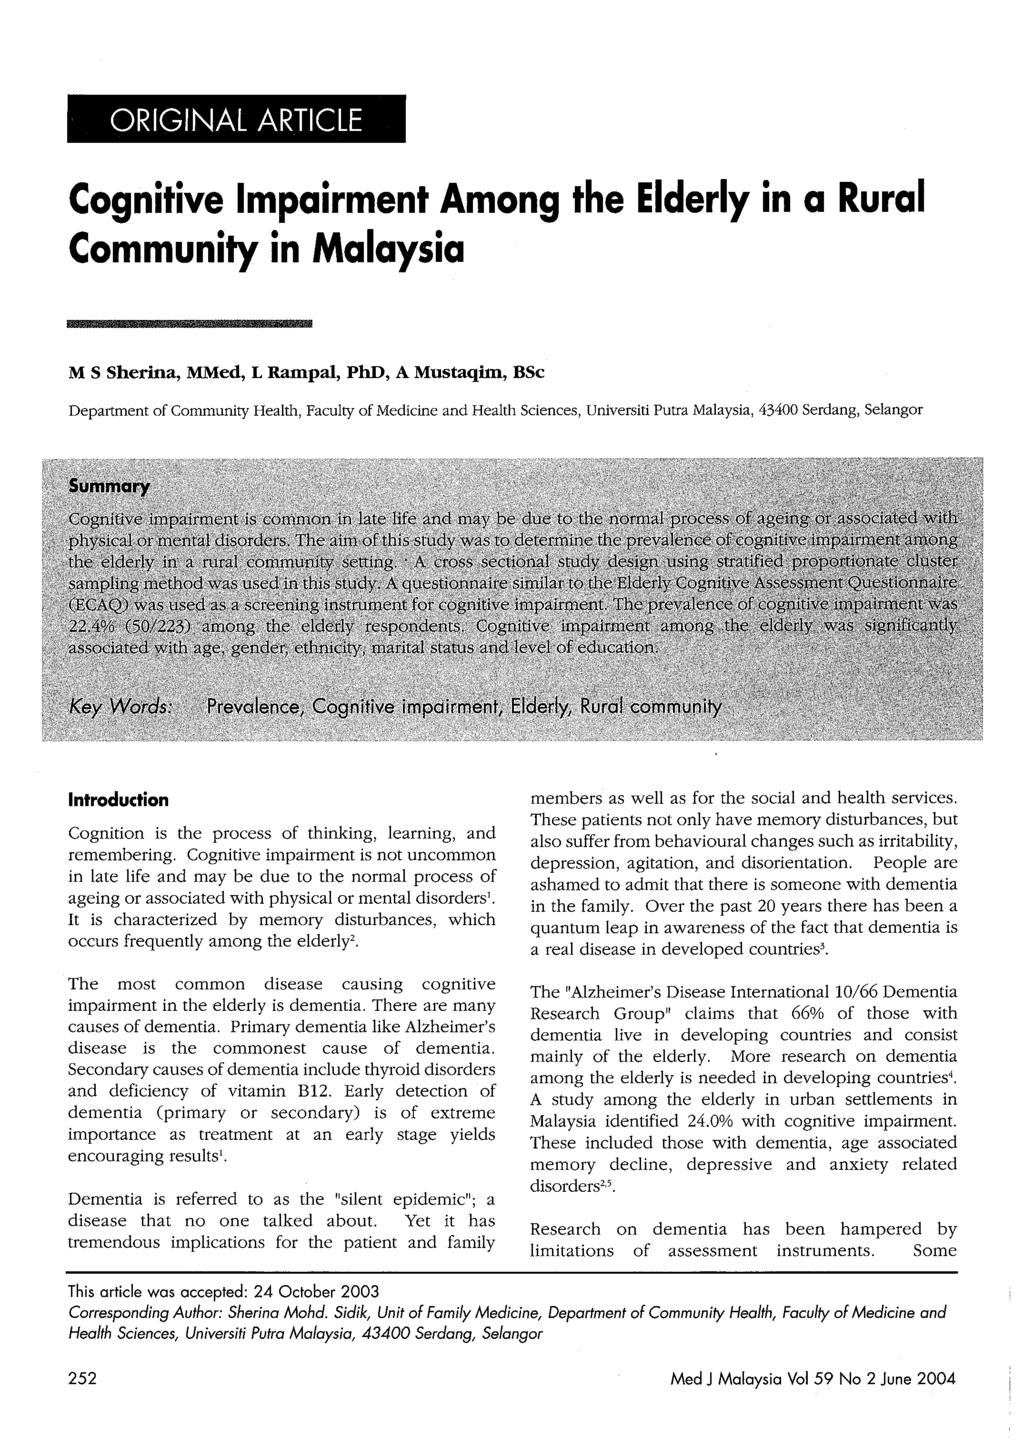 ORIGINAL ARTICLE Cognitive Impairment Among the Elderly in a Rural Community in Malaysia M S Sherina, MMed, L Rampal, PhD, A Mustaqim, BSc Department of Community Health, Faculty of Medicine and